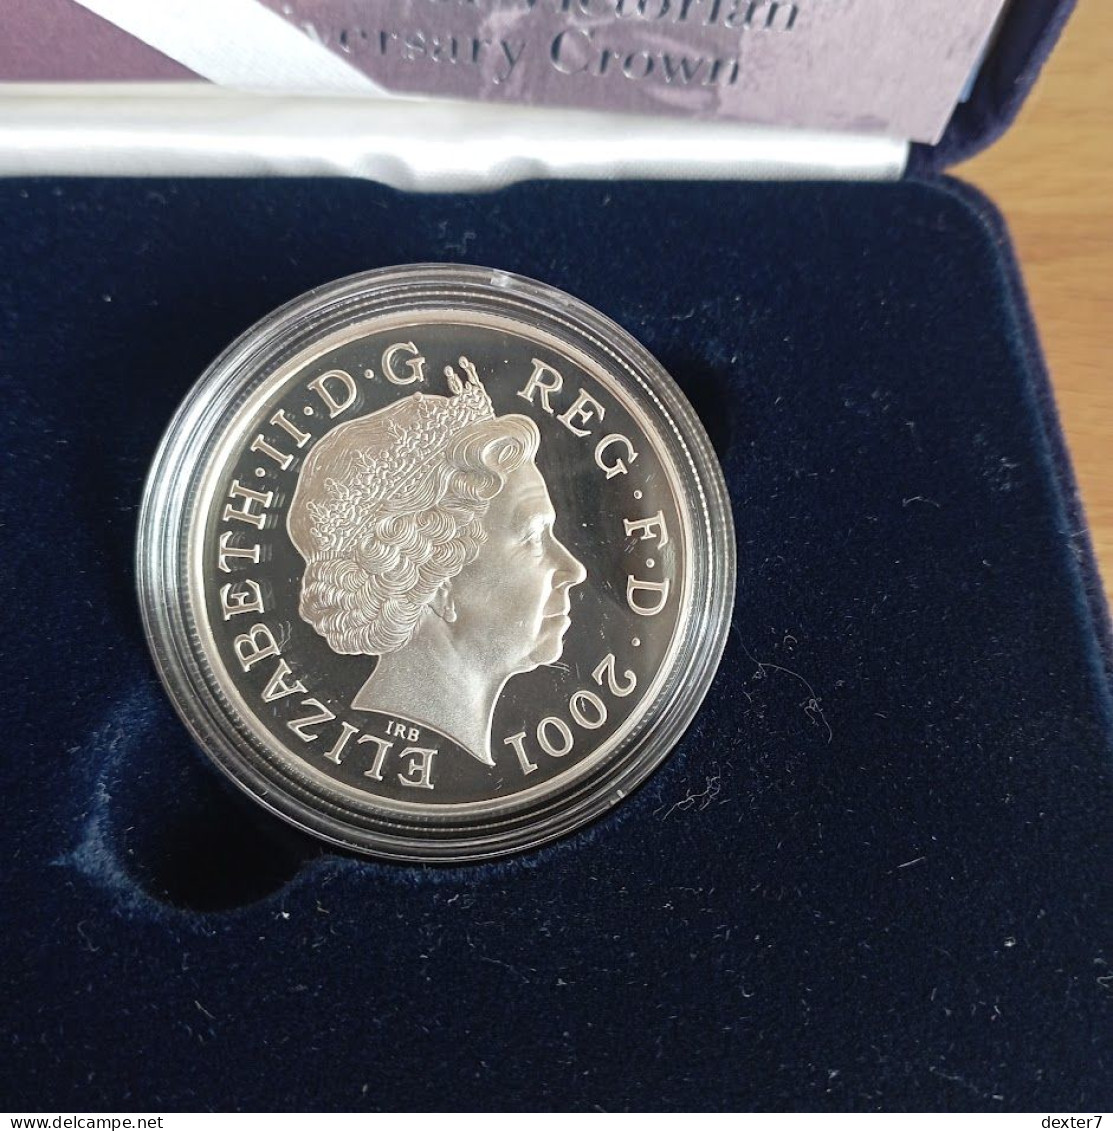 United Kingdom UK 2001 Silver 5 Pounds Queen Victoria In Box - 5 Pounds